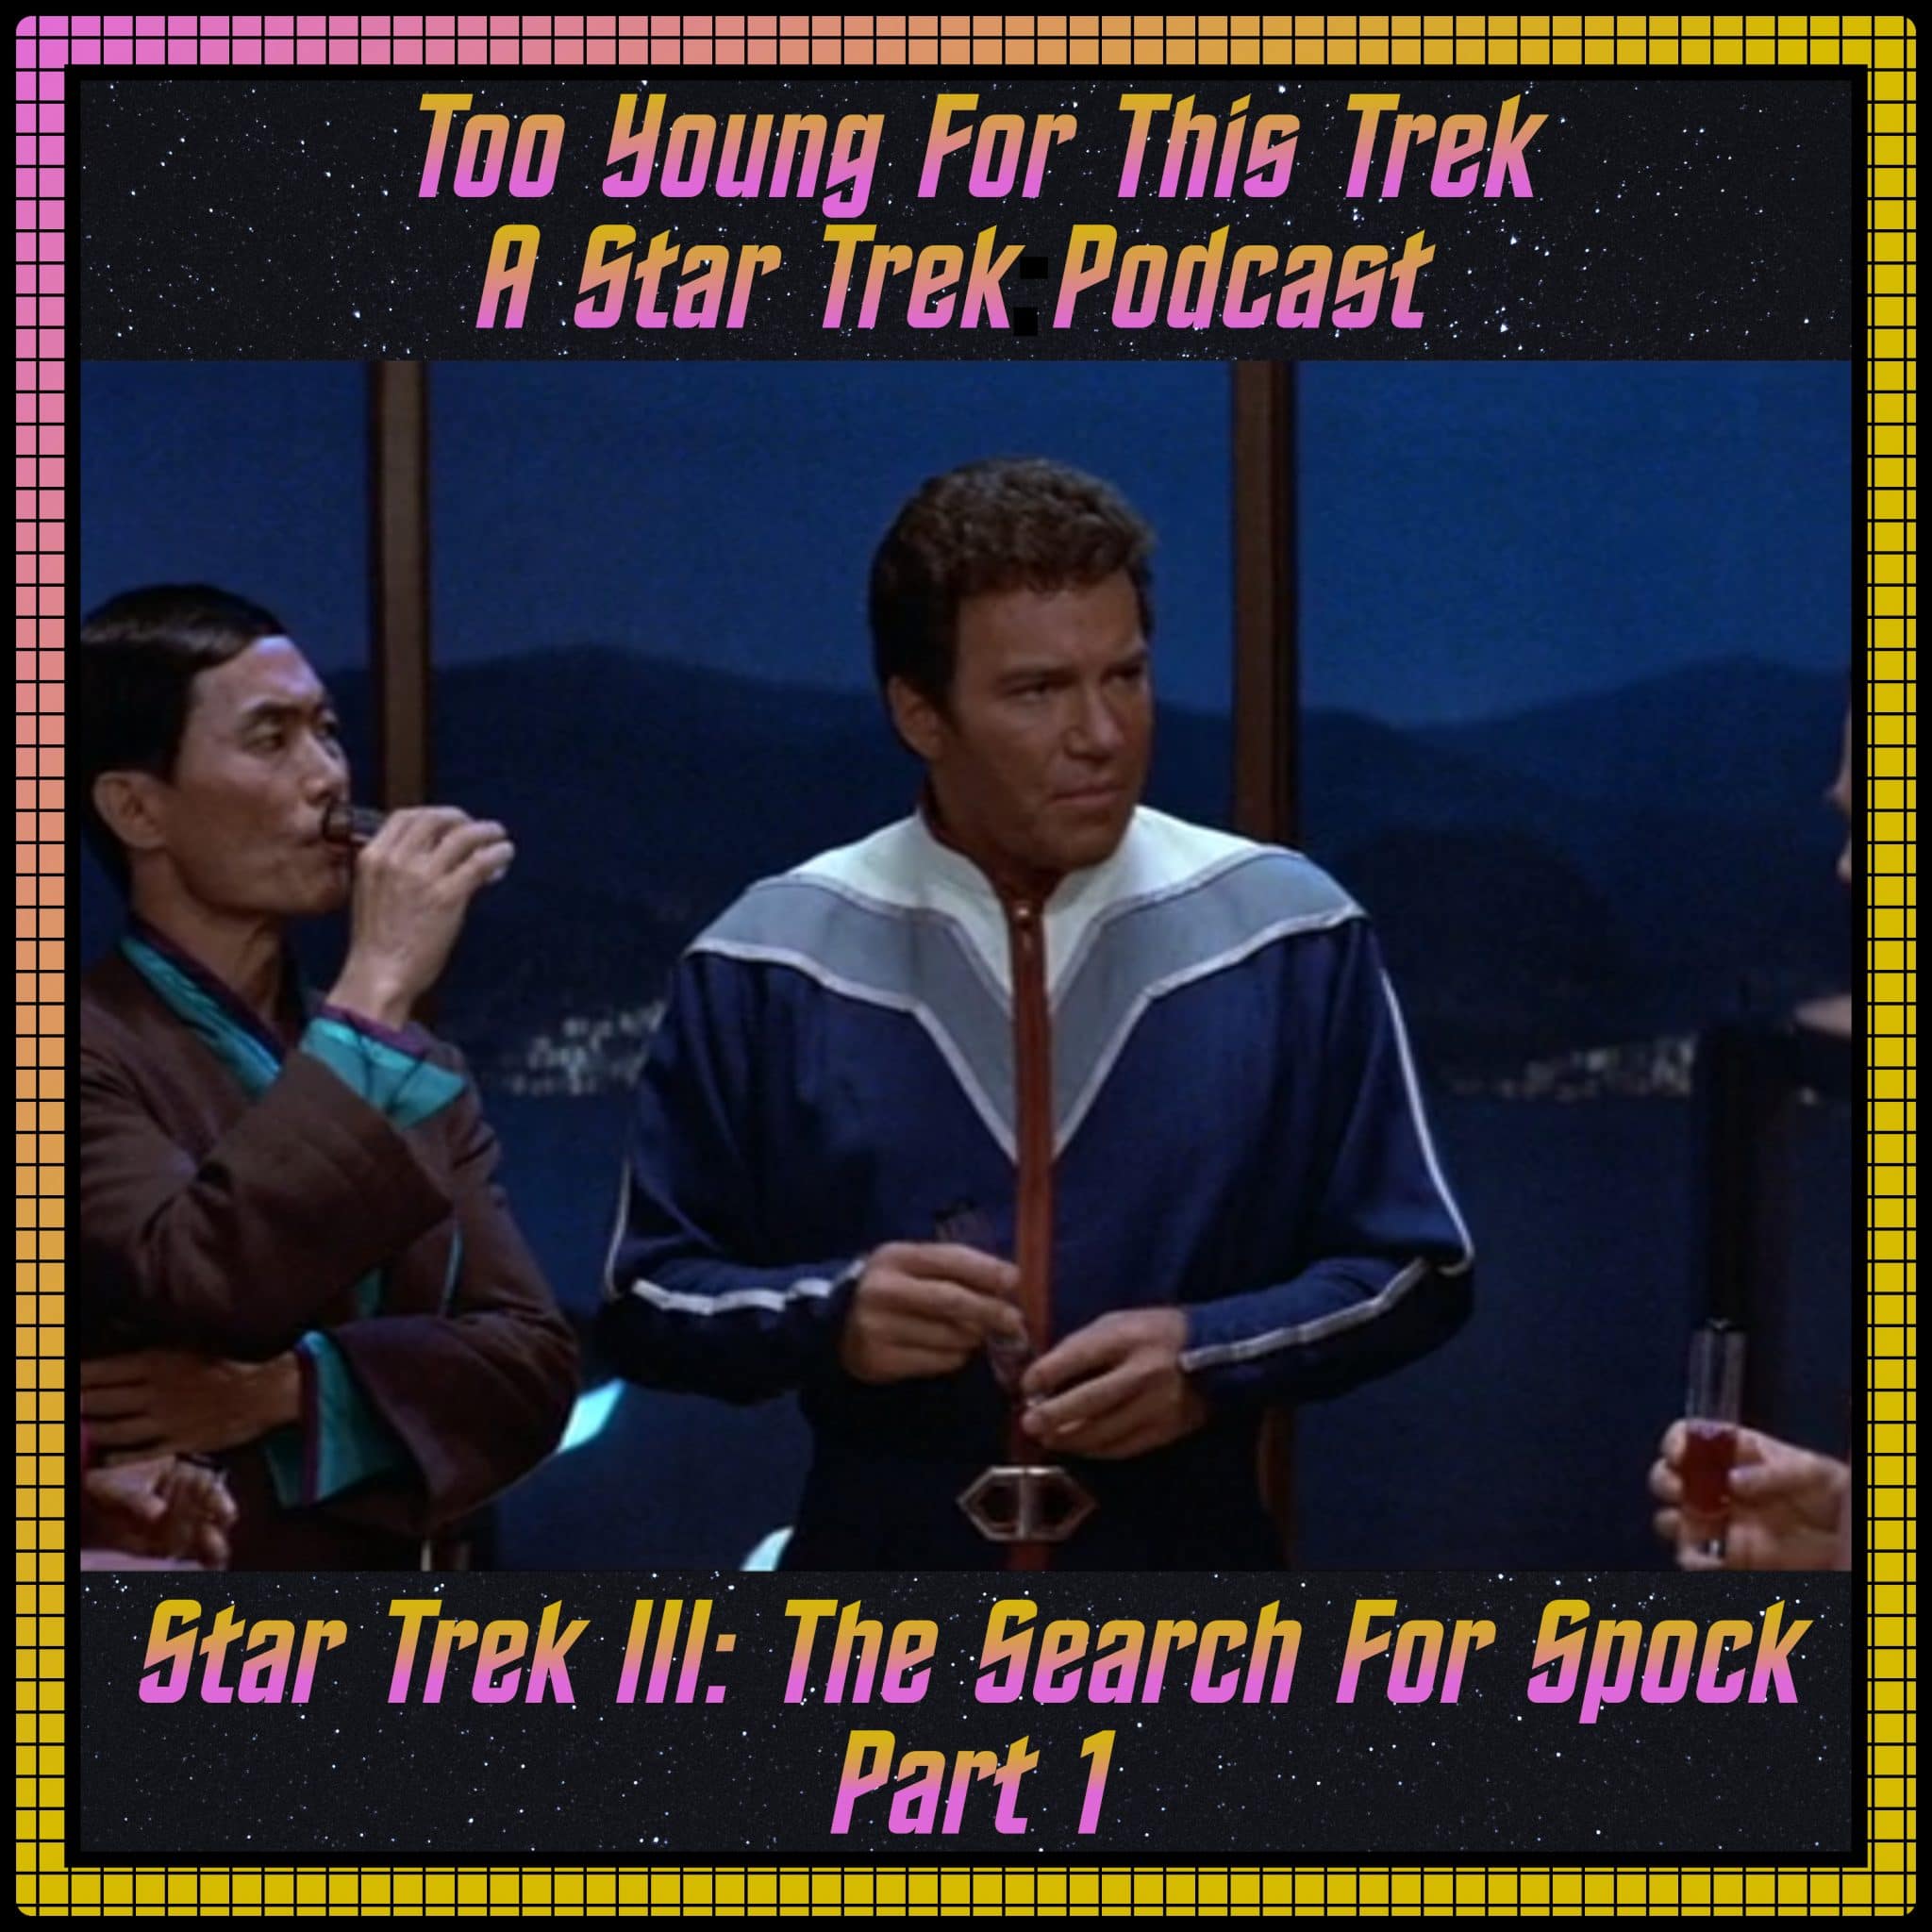 Star Trek III: The Search For Spock - Part 1